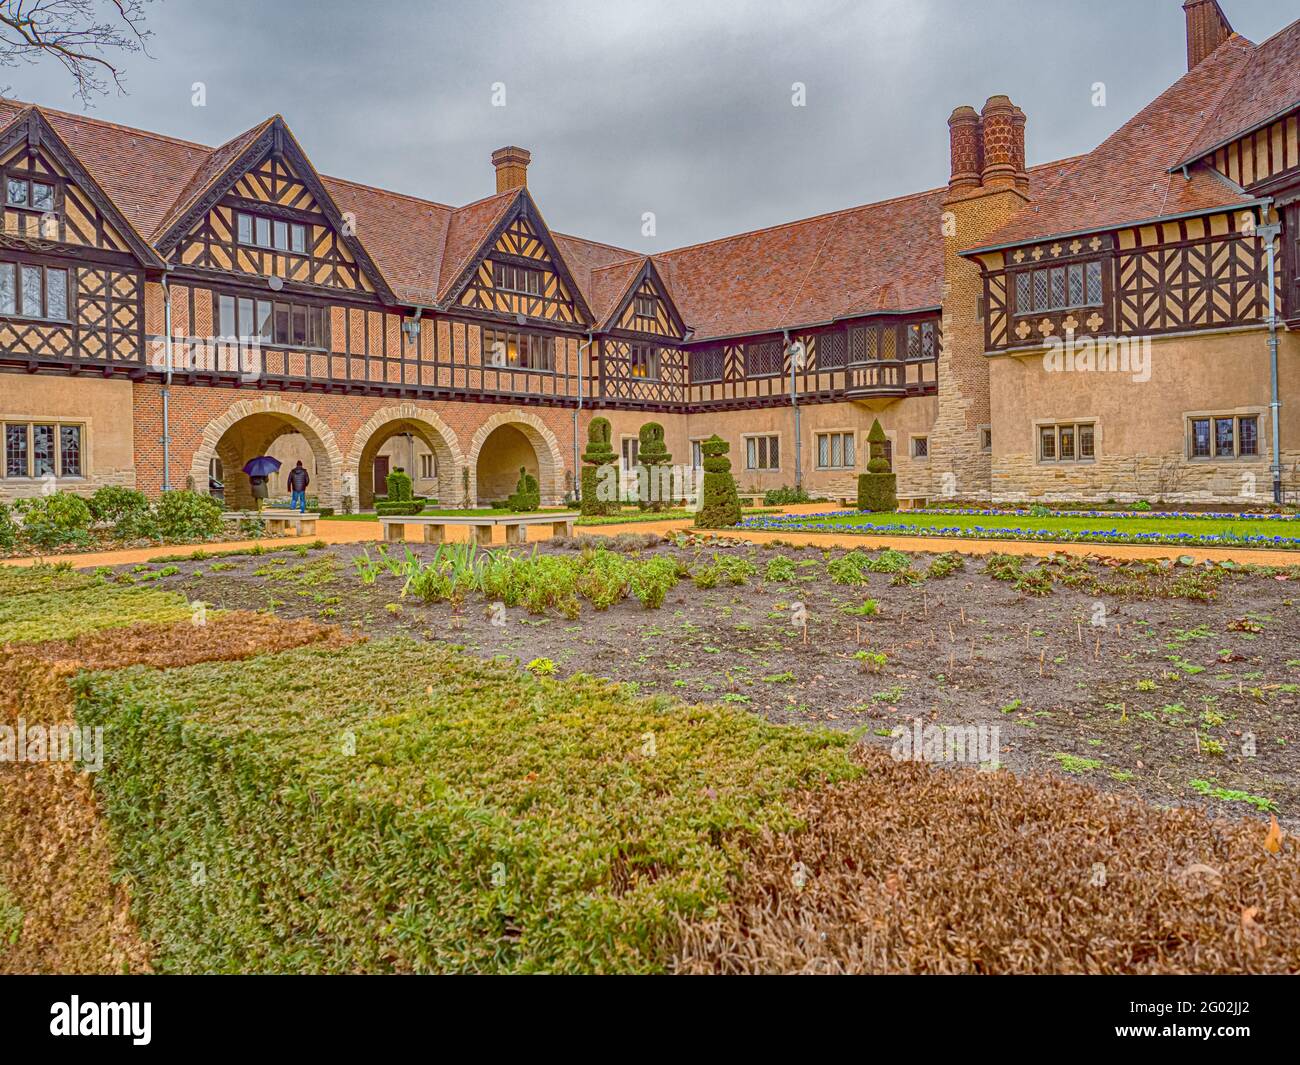 Potsdam, Brandenburg, Germany - Mar 2019: Cecilienhof Palace - Cecilienhof Schloss - historic place of the Potsdam Conference of 1945- located in the Stock Photo